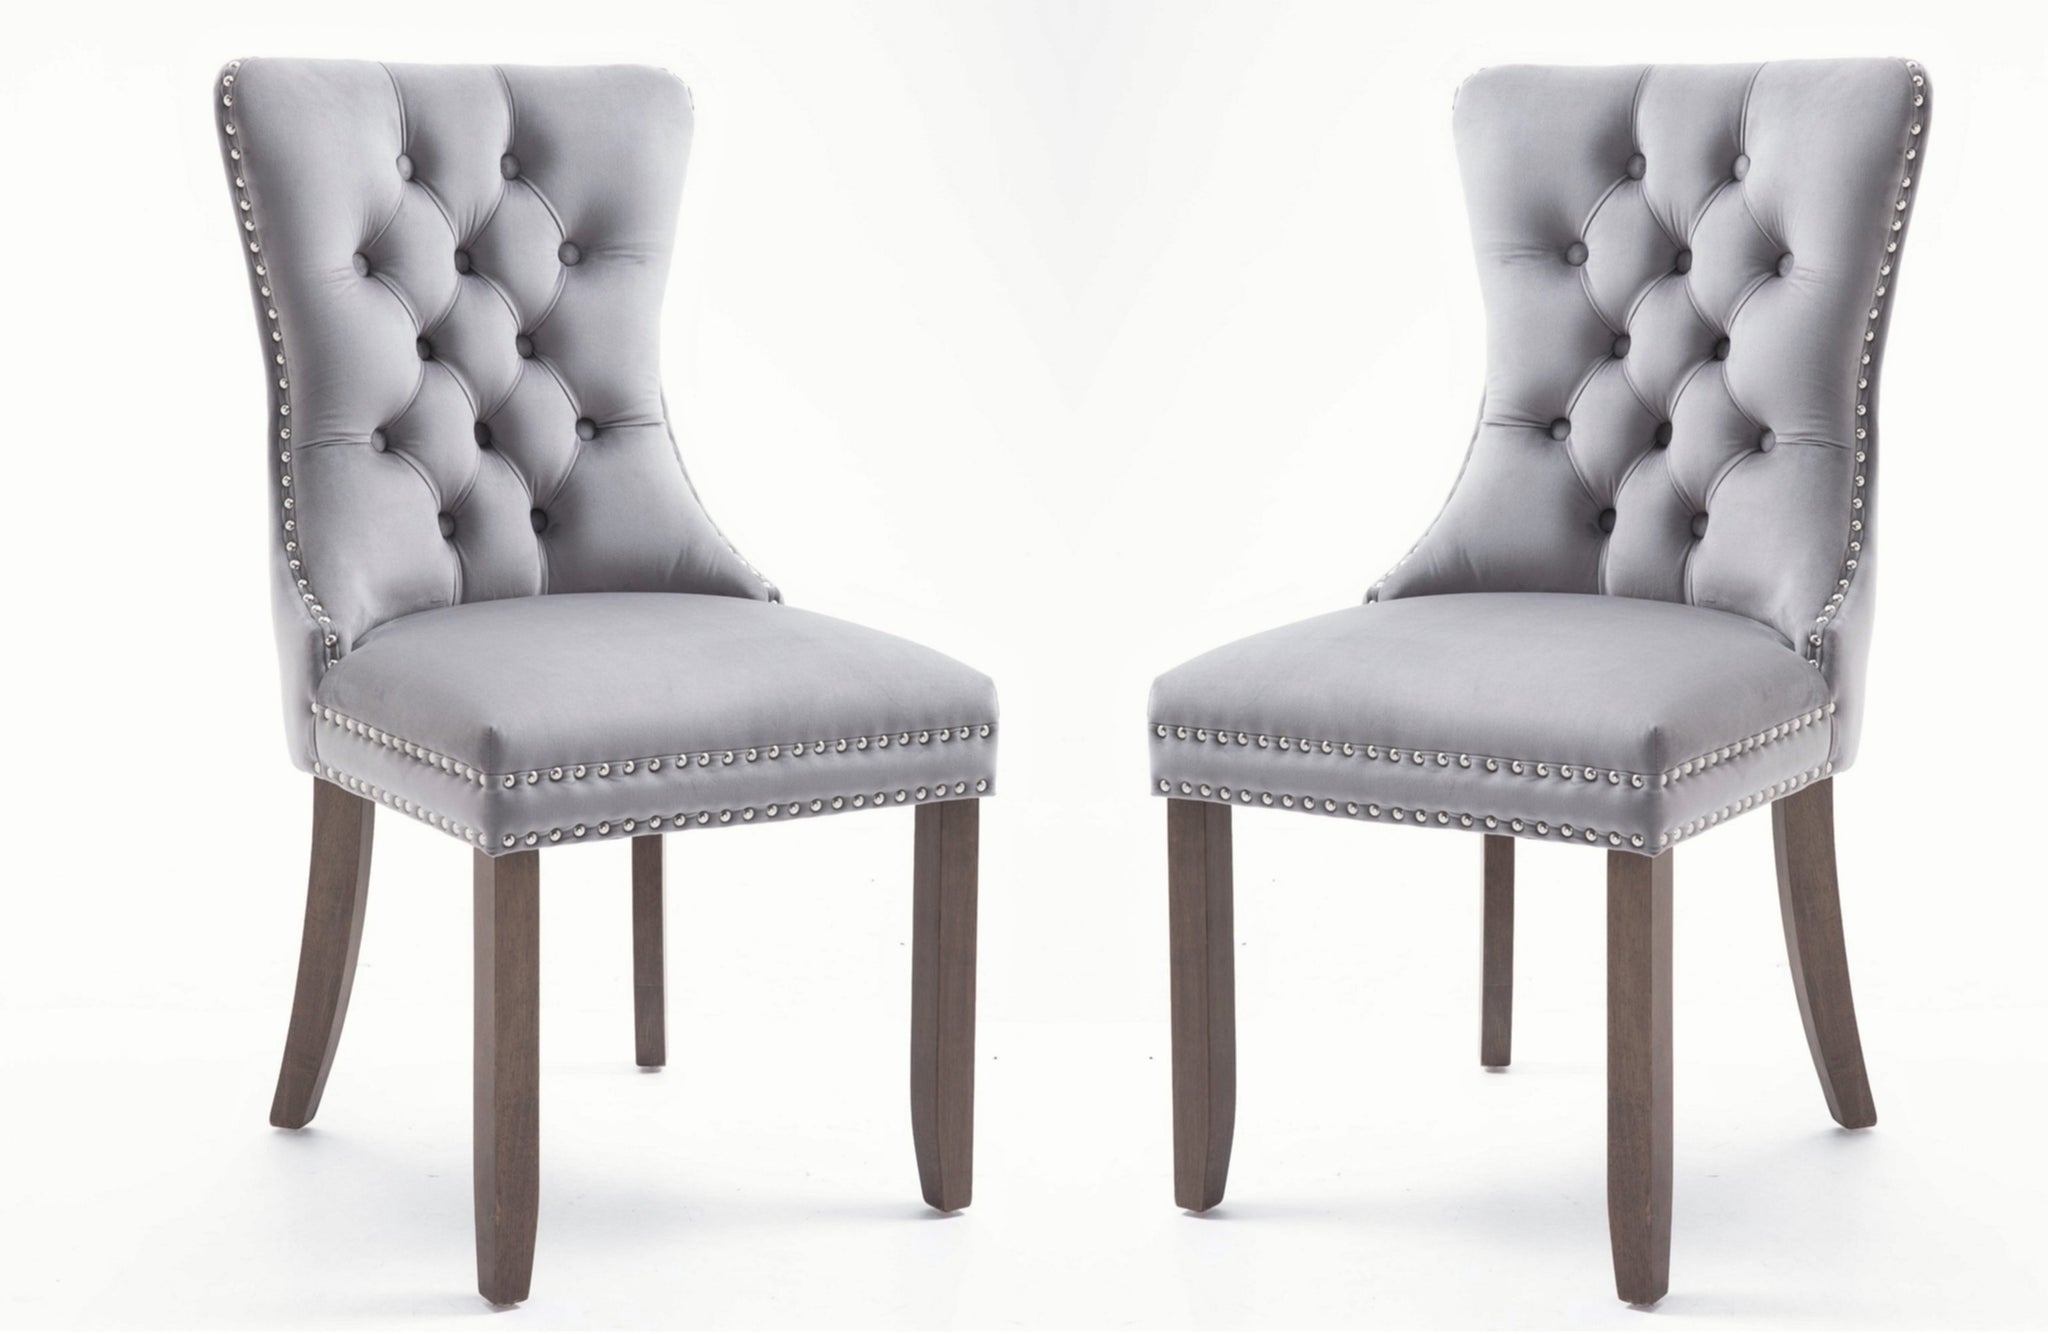 2 PCS High-end Tufted Solid Wood Upholstered Dining Chair with Nail-head Trim